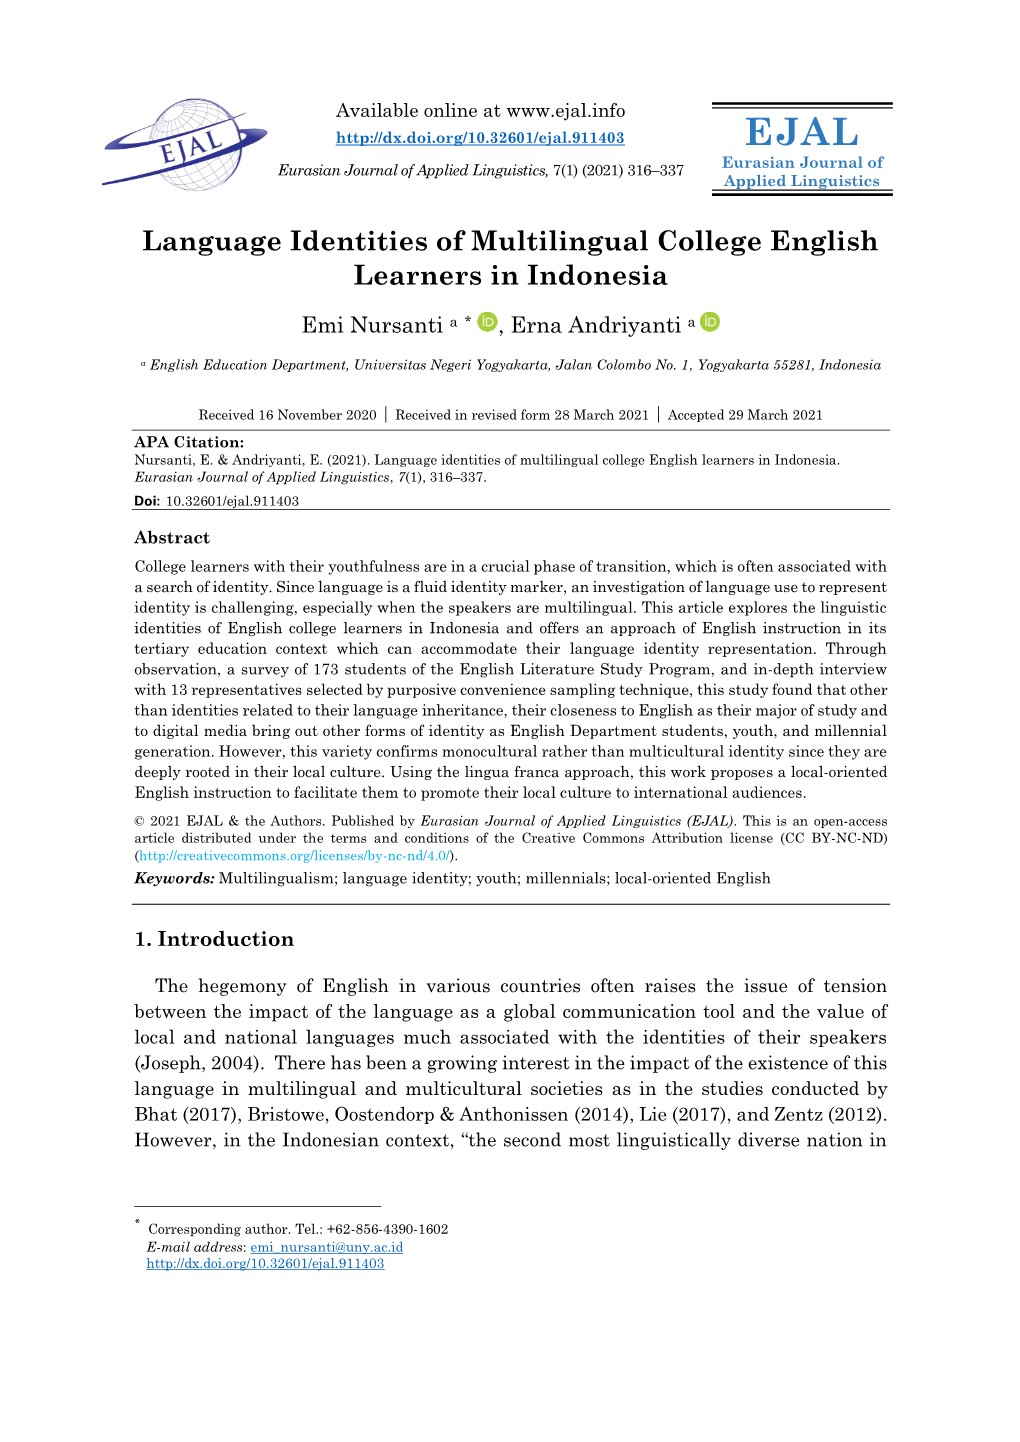 Language Identities of Multilingual College English Learners in Indonesia